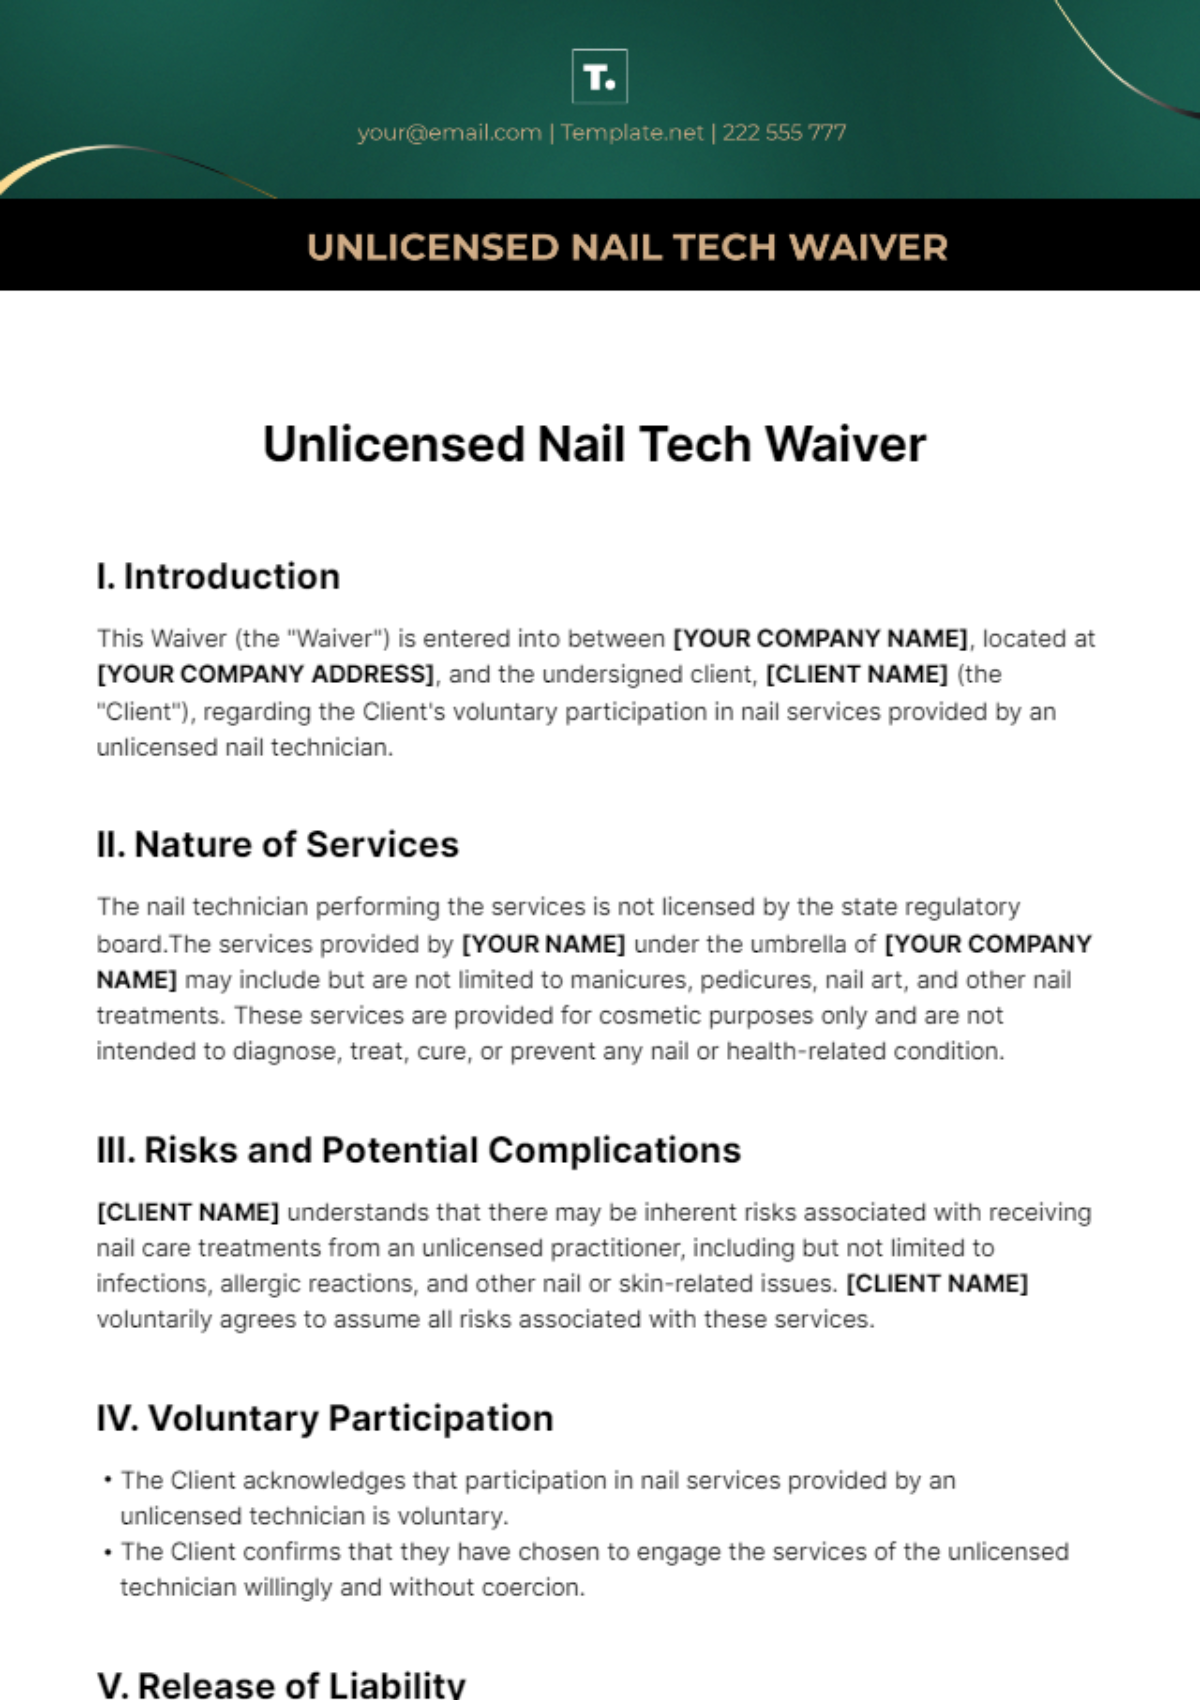 Free Unlicensed Nail Tech Waiver Template